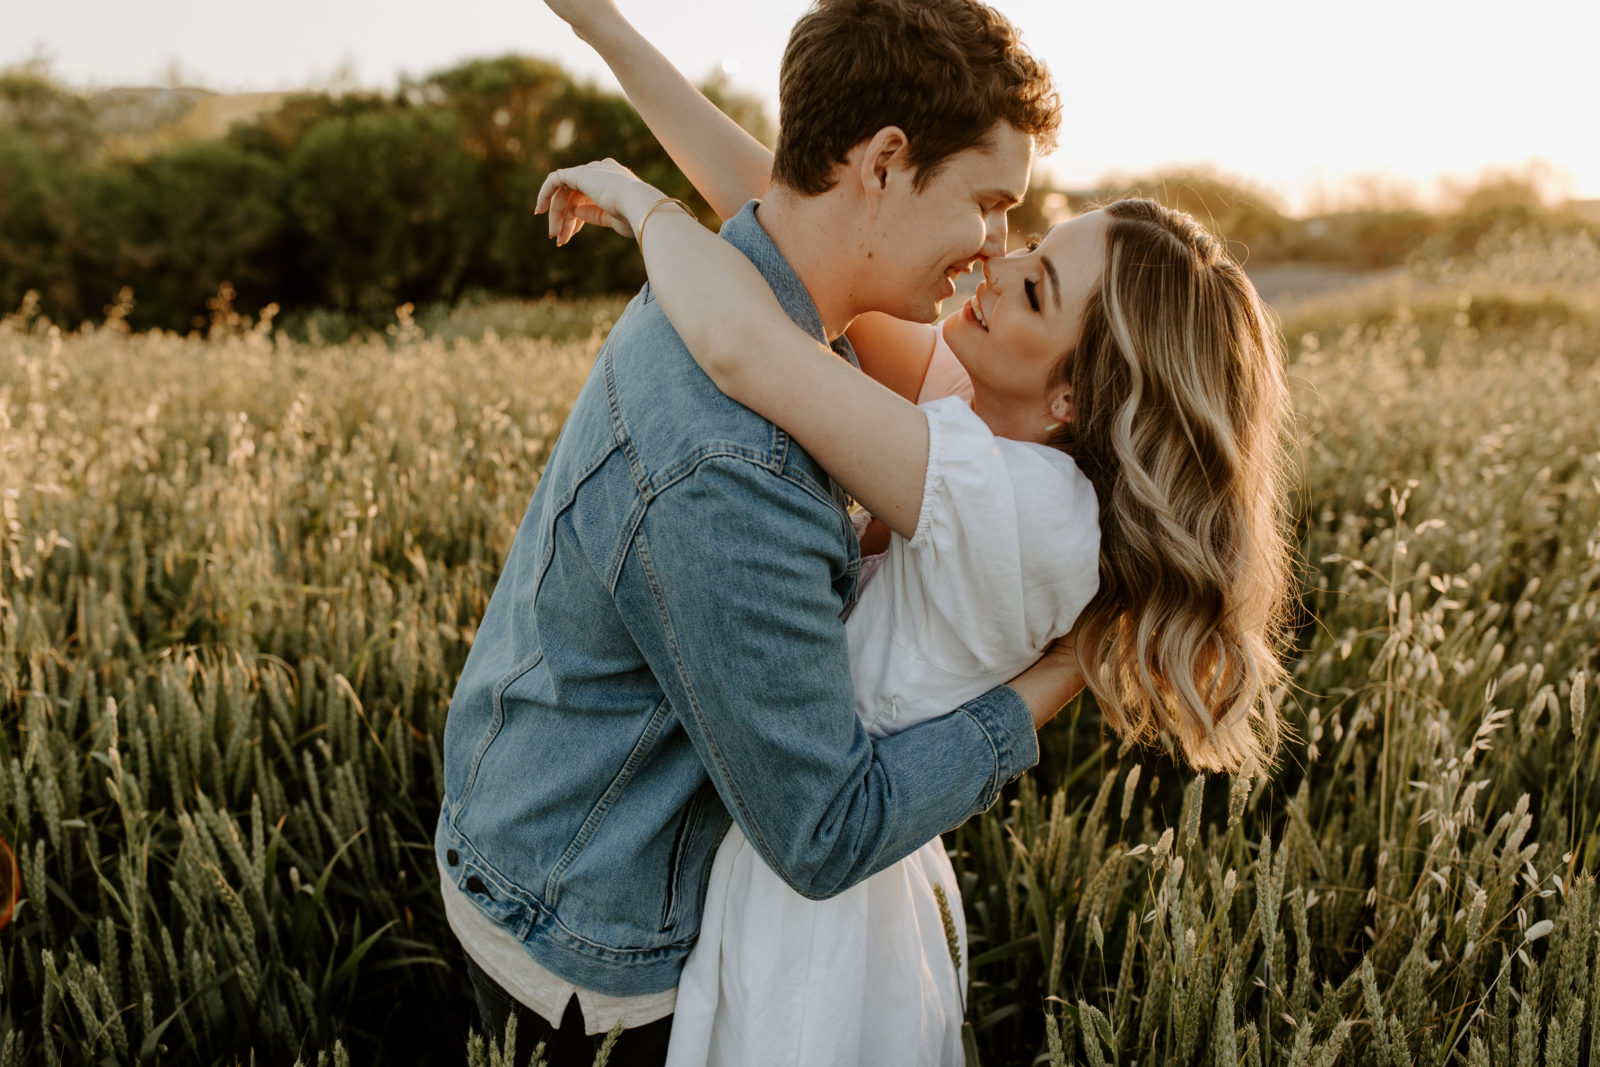 Dreamy Summer Couples Session // Julie + Blake